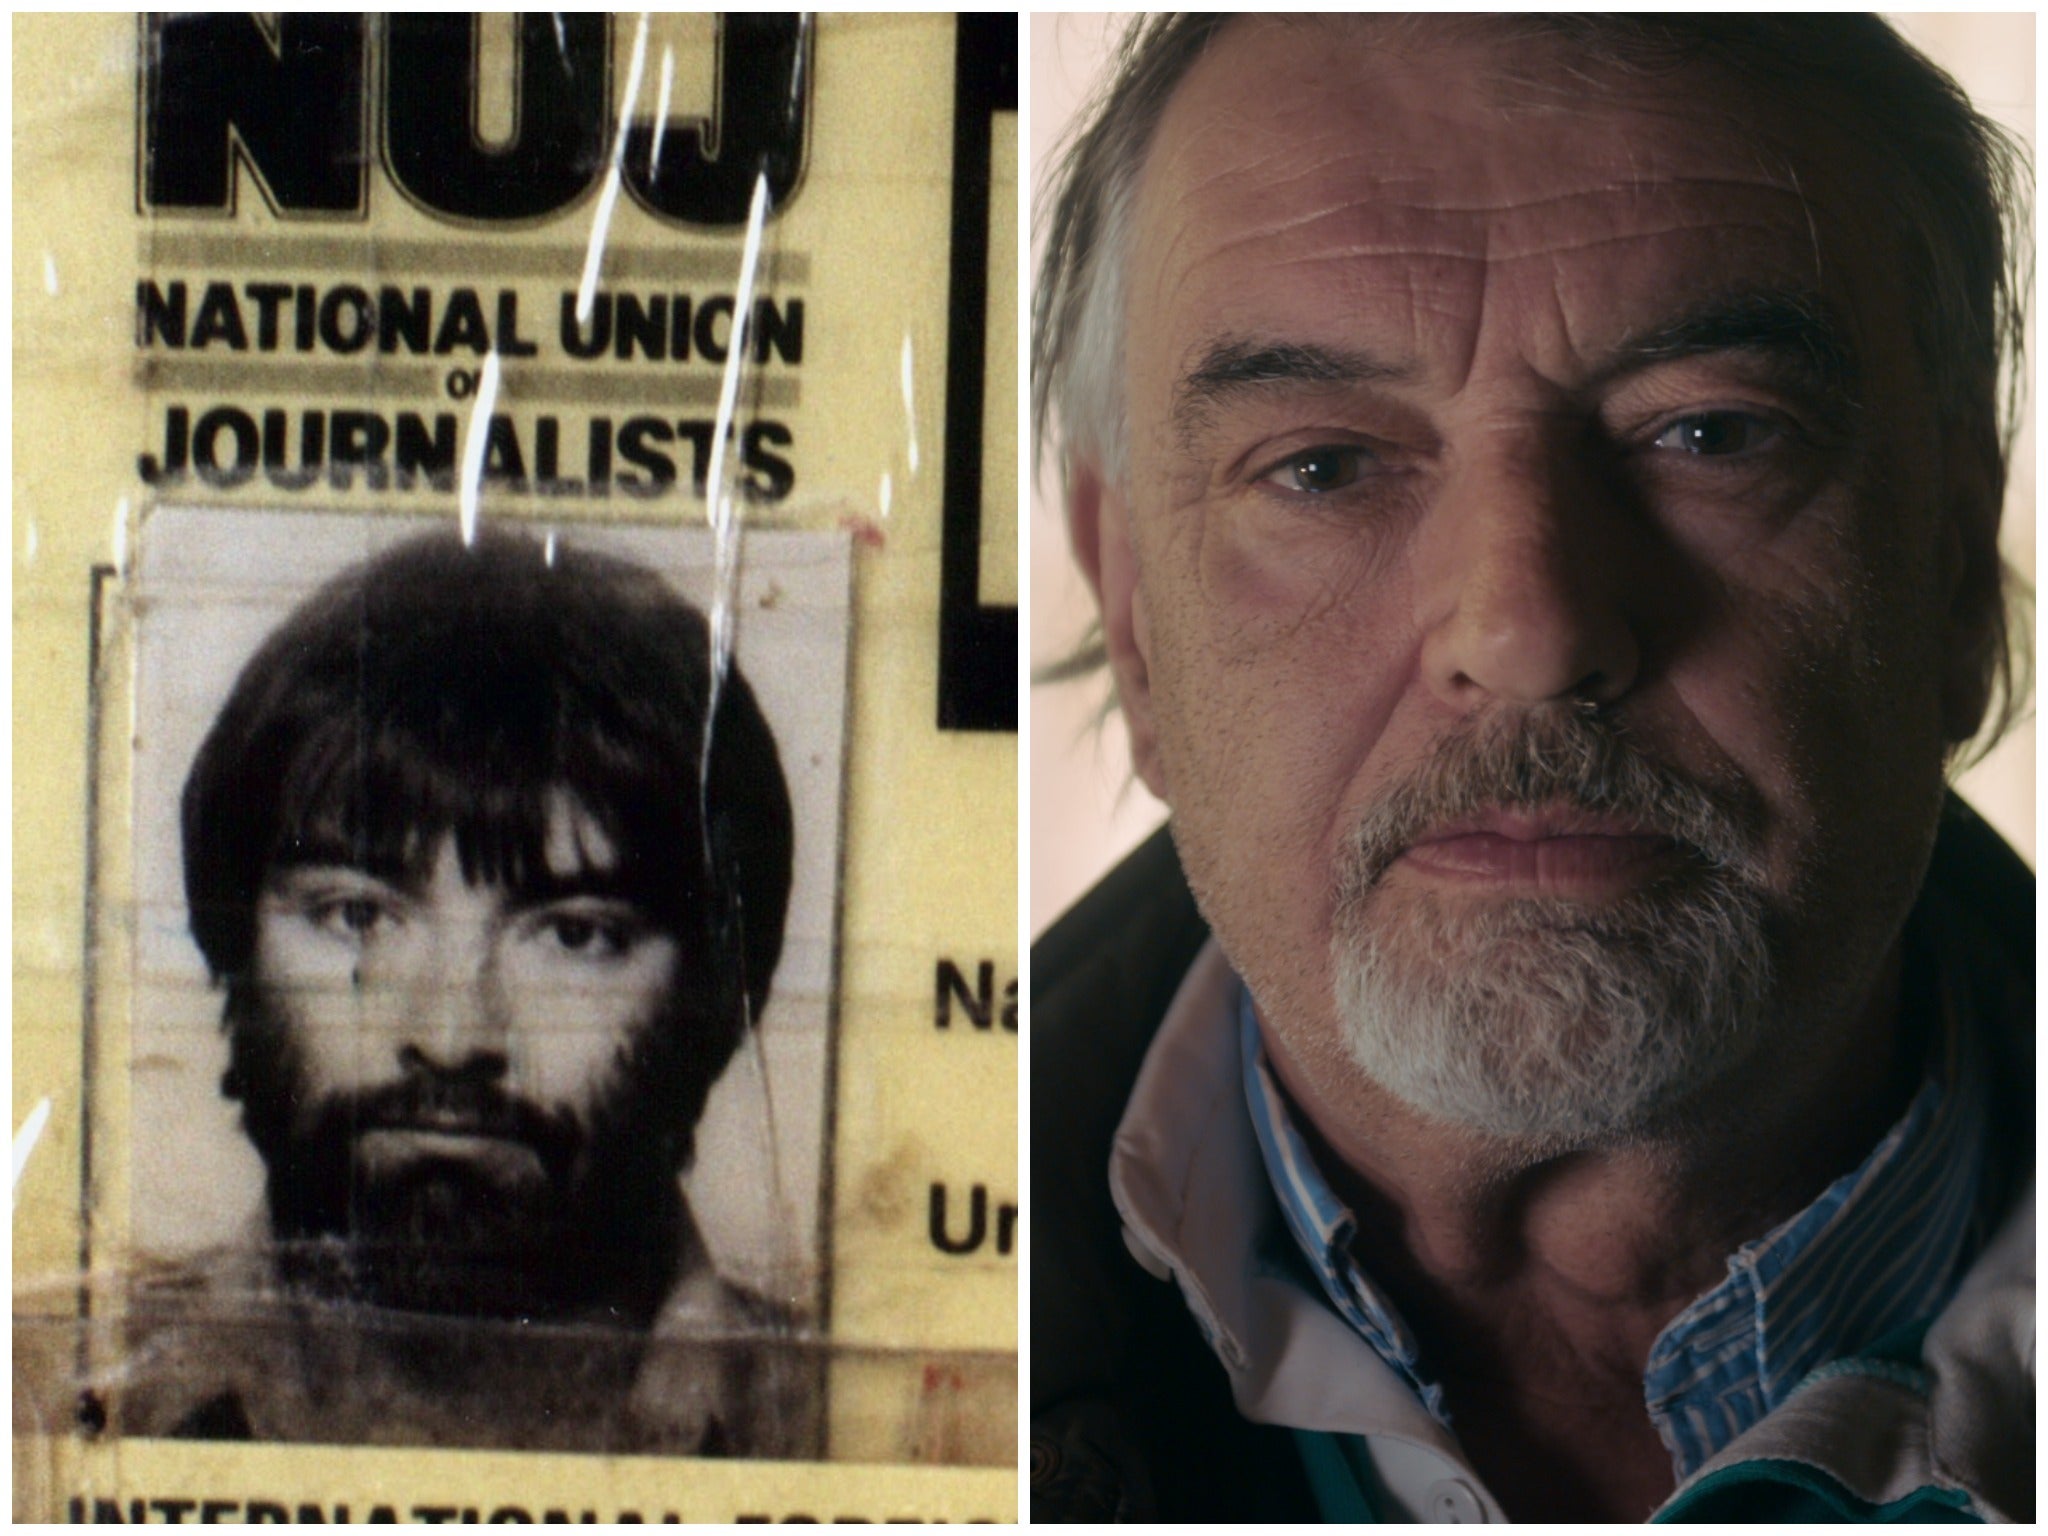 Then and now: Prime suspect Ian Bailey